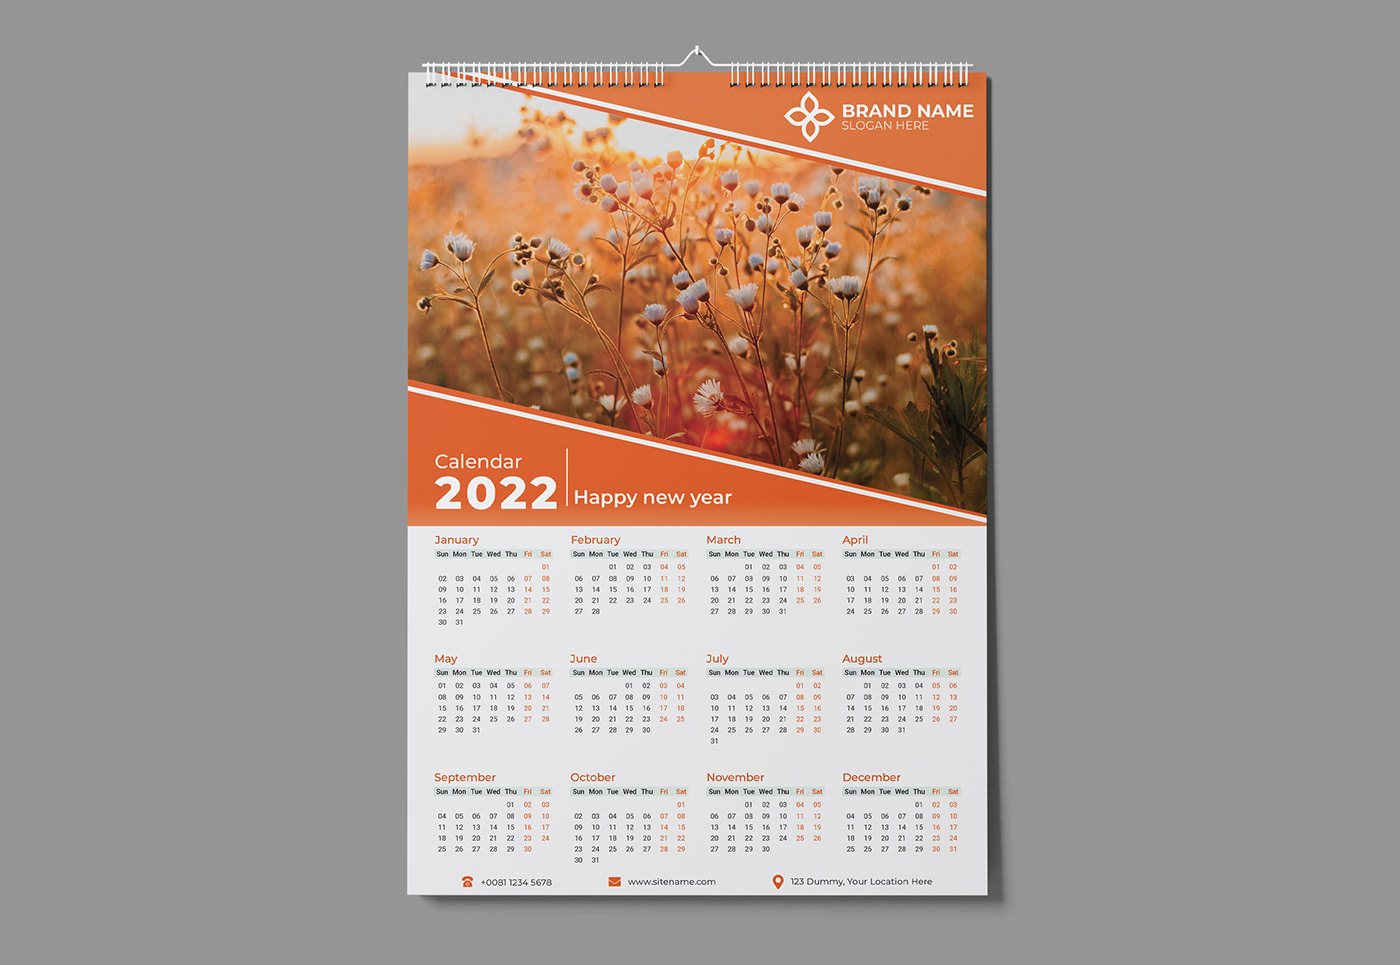 calendar Calendar 2022 calendar design calendar design 2022 Calendar Template card new year one page calendar wall calendar Wall Calendar 2022